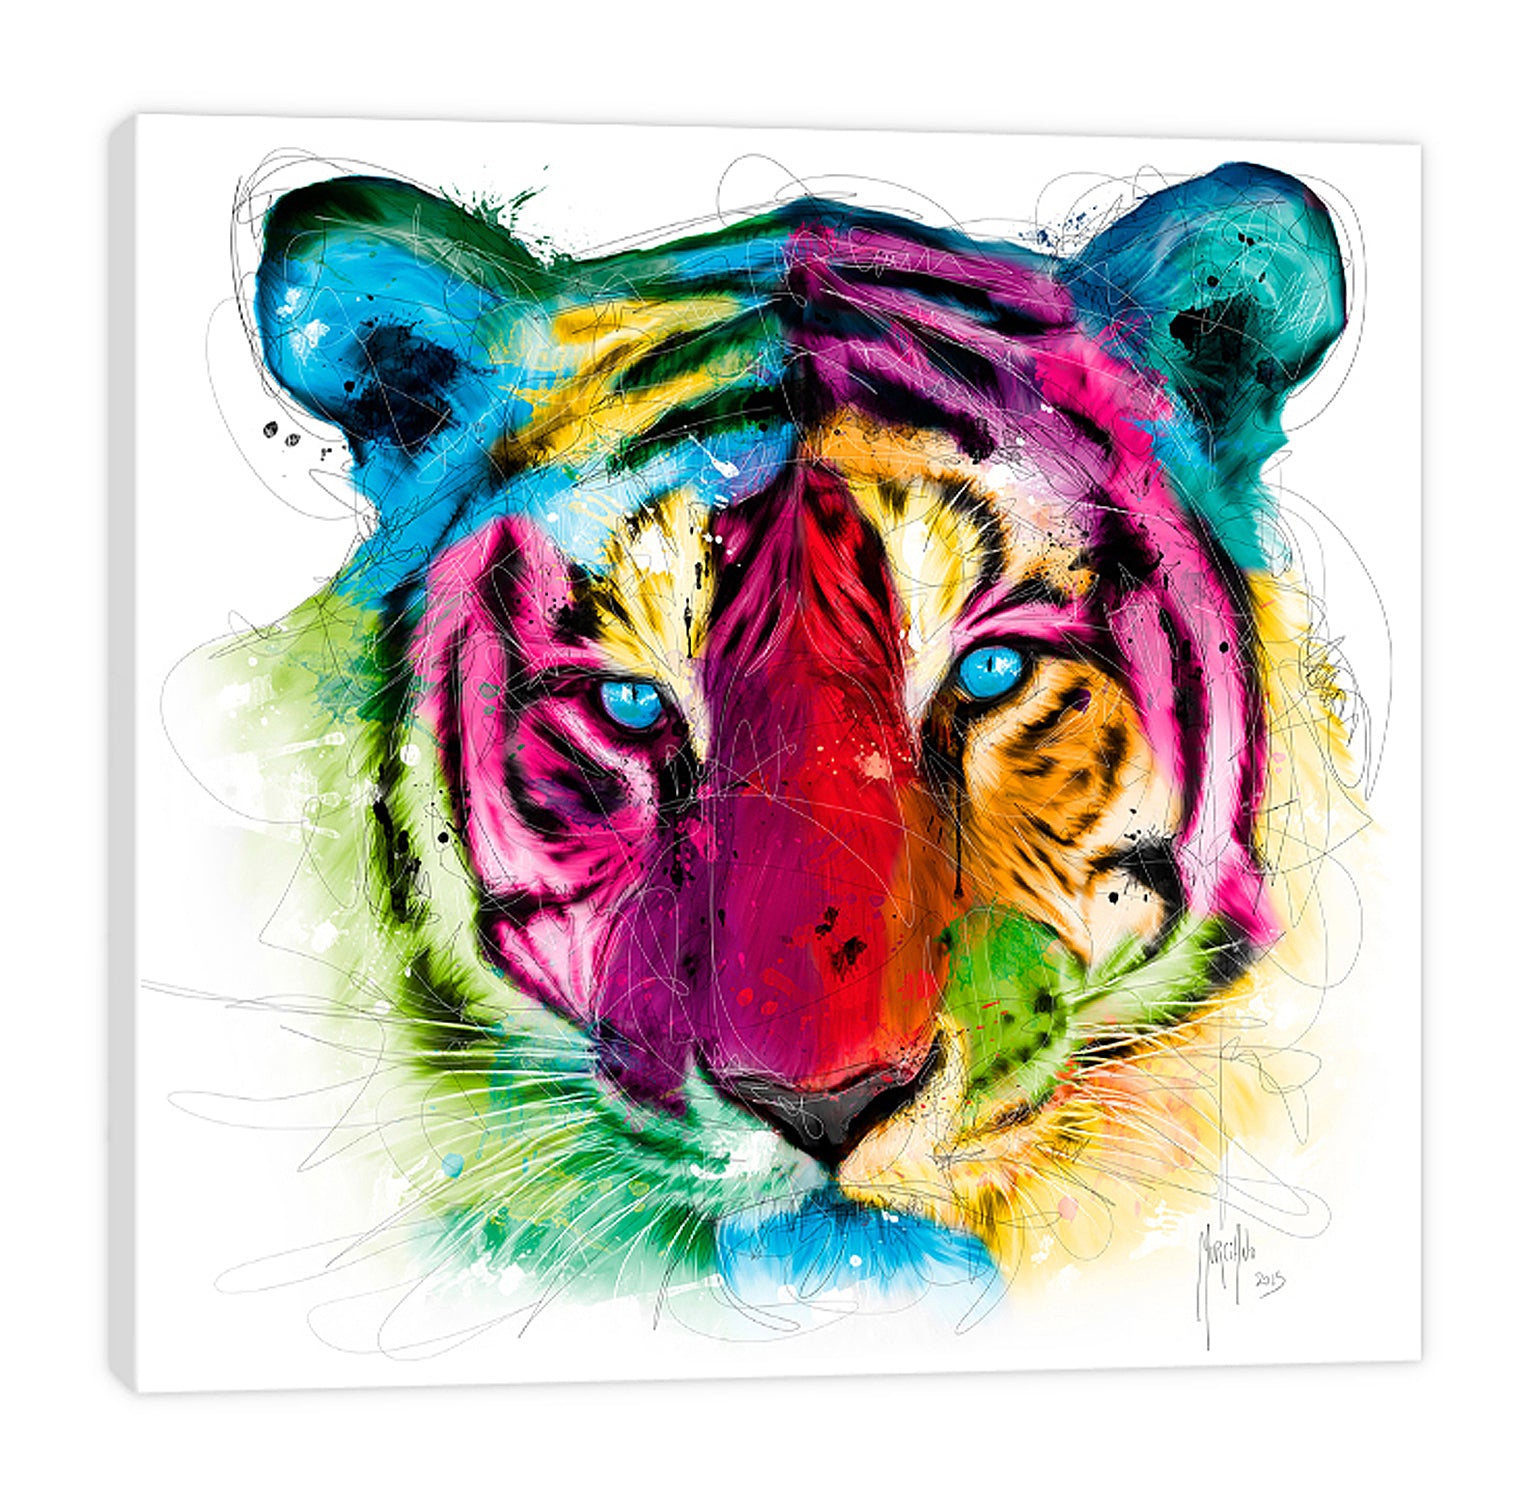 Patrice-Murciano,Modern & Contemporary,Animals,tiger,tigers,animals,ombre,lines,colorful,Red,Mist Gray,Black,Gray,Green,Lavender Purple,Blue,Brown